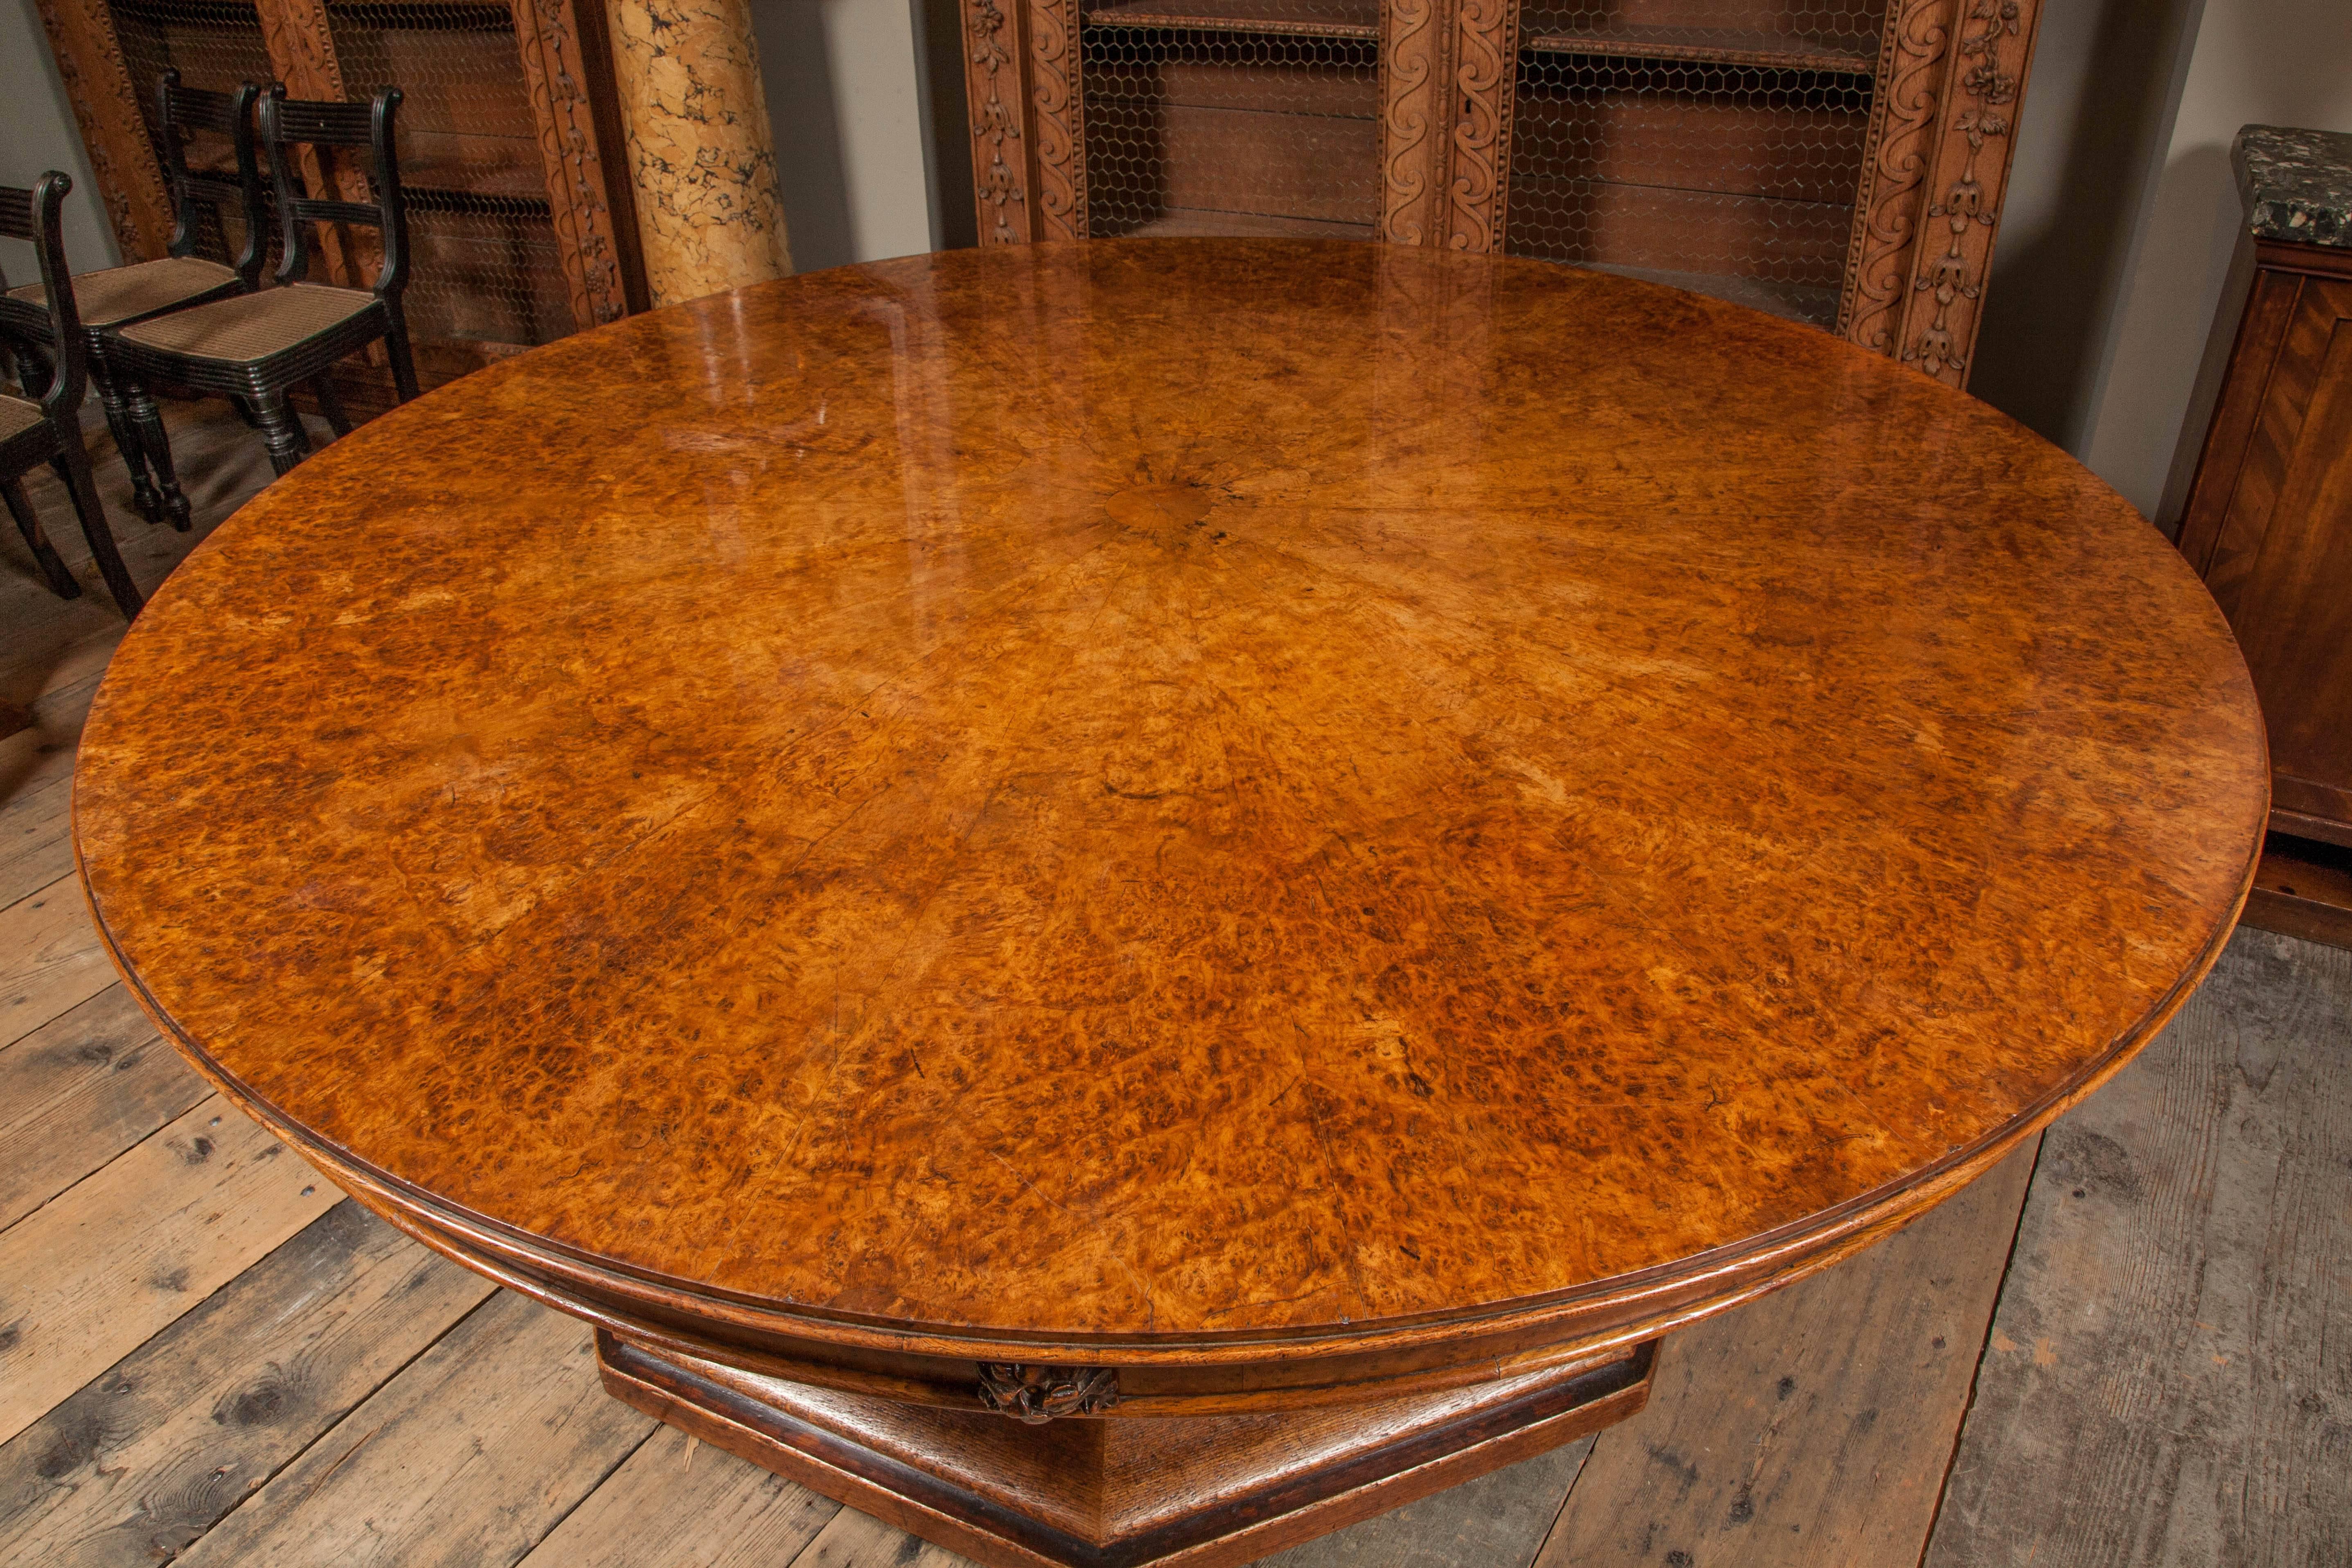 Attributed to Gillows. Commissioned by the 2nd Earl of Mountnorris for Arley Castle Worcestershire.

This magnificent table designed in the fashionable Gothic style popularized by Augustus Pugin from the 1830s has a segmented top veneered in